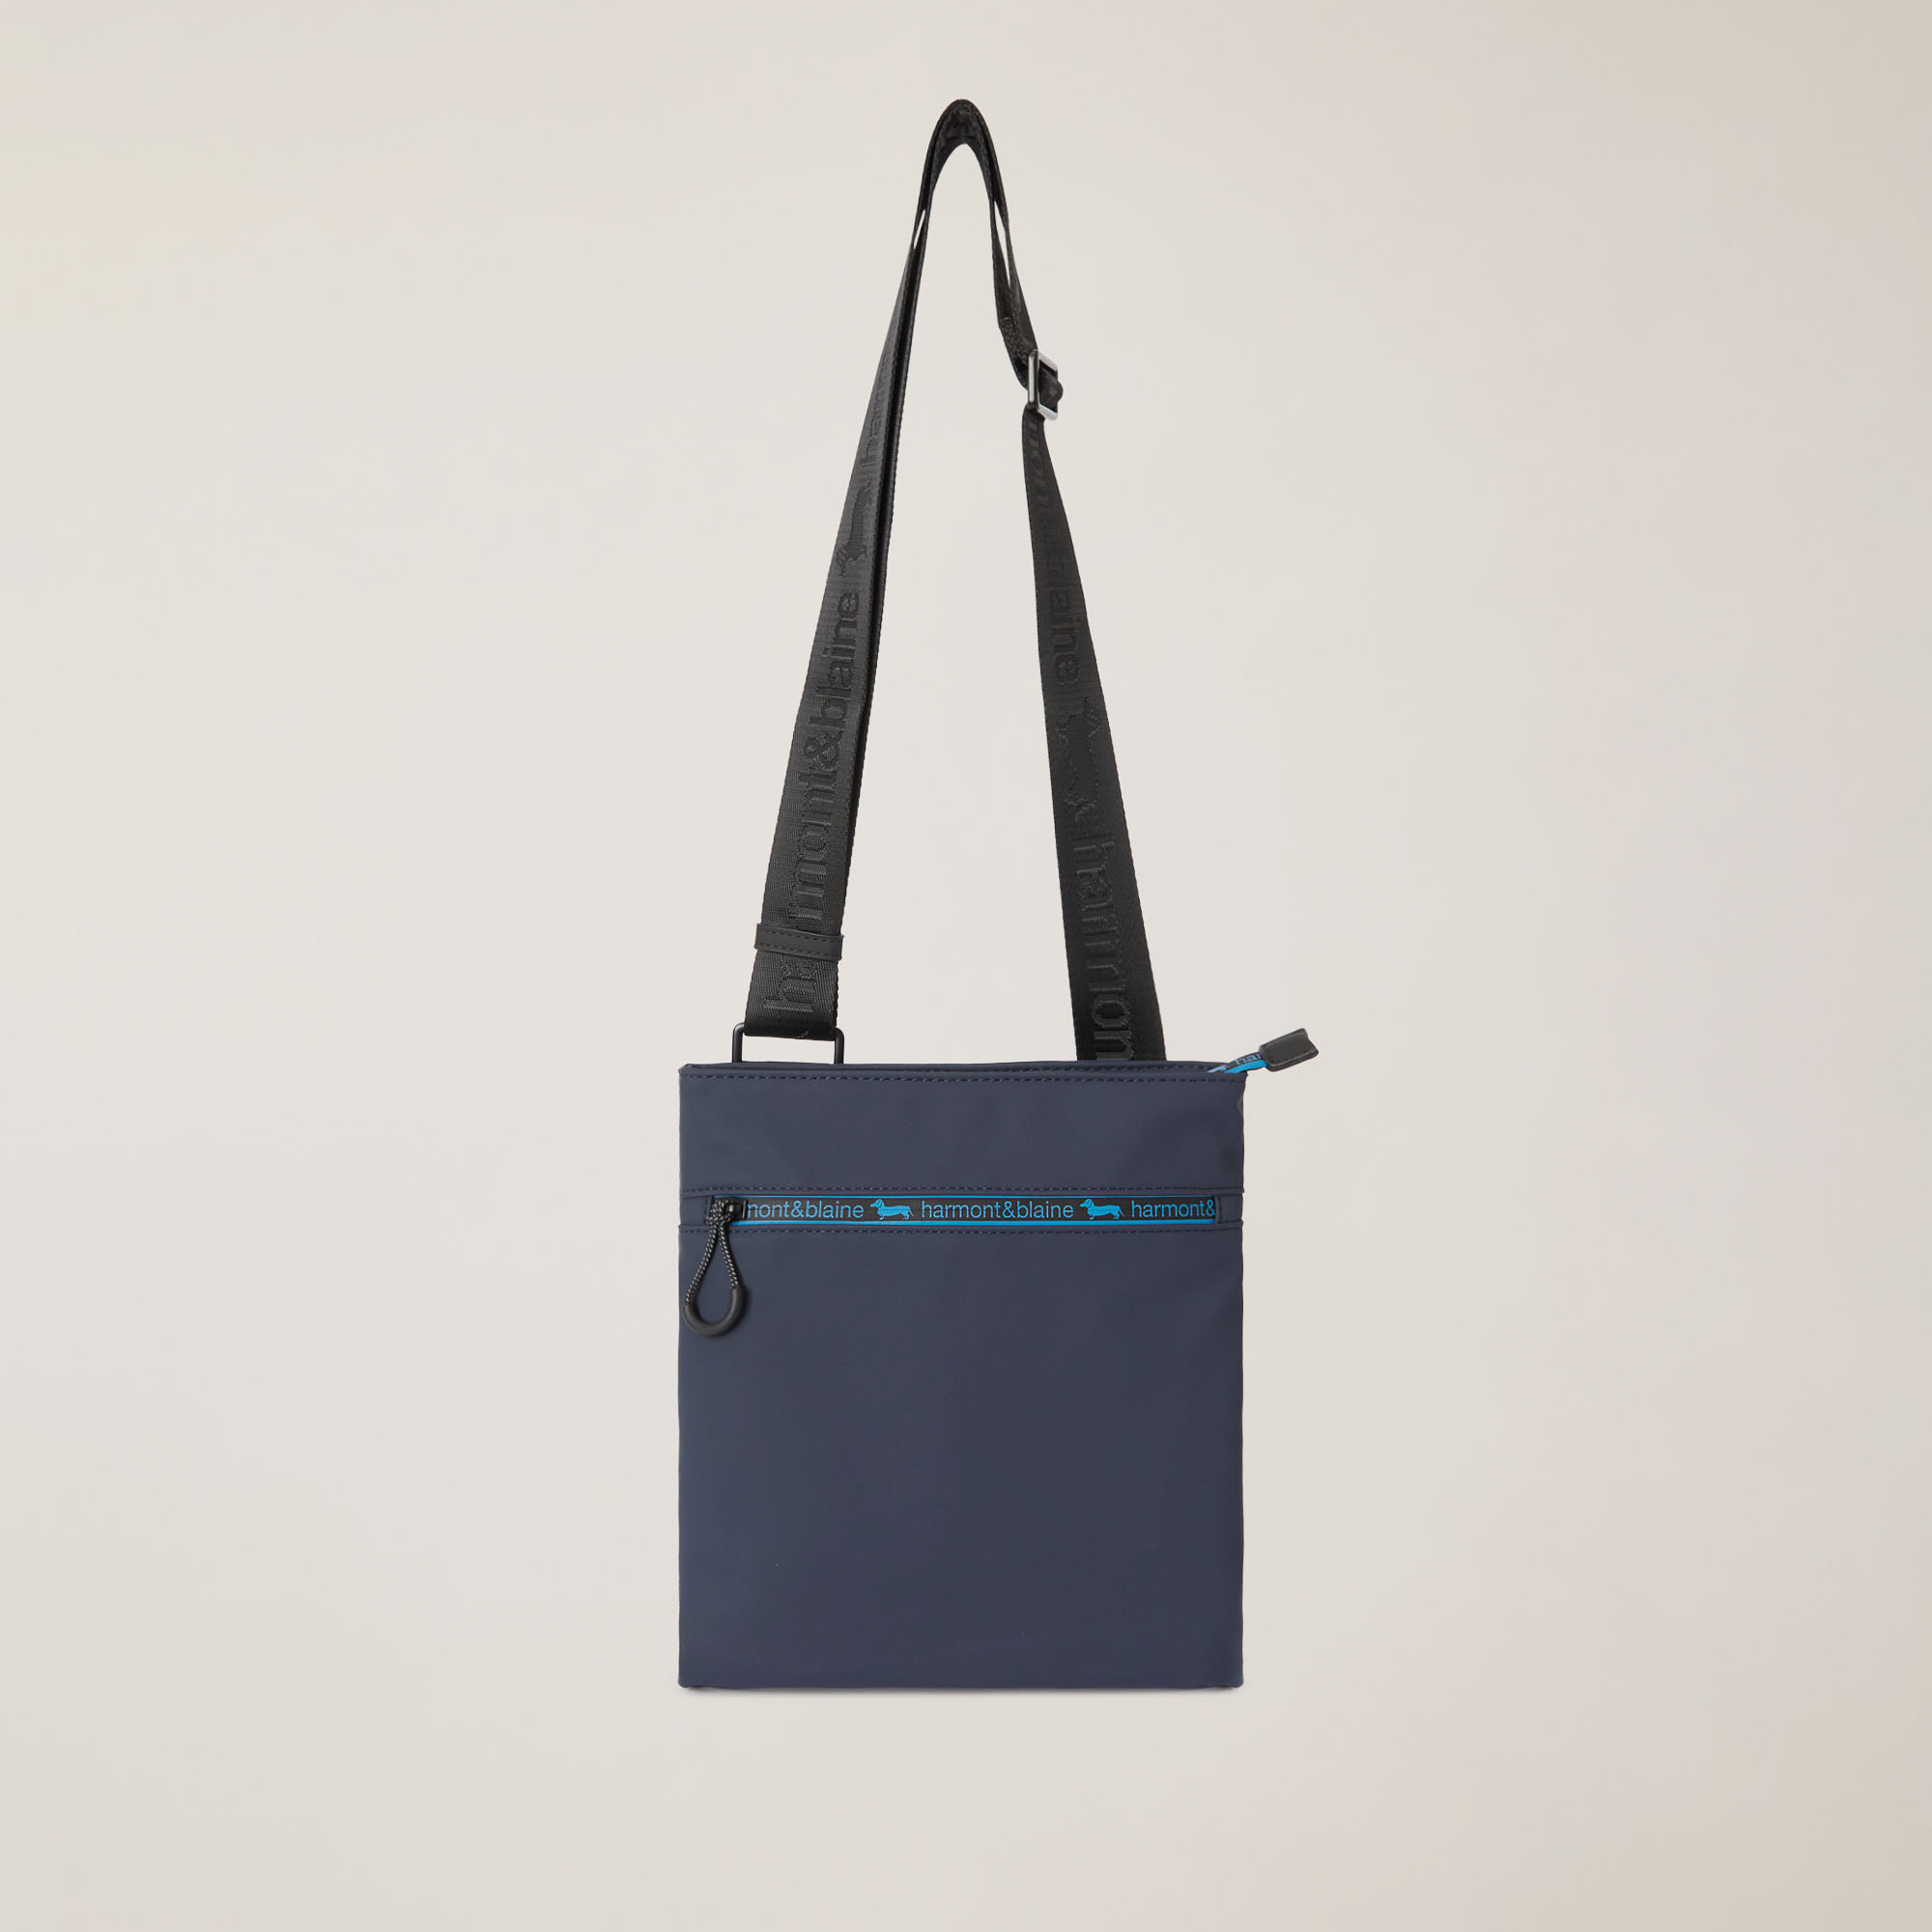 Borsa A Tracolla Con Lettering E Logo, Blu Navy, large image number 0